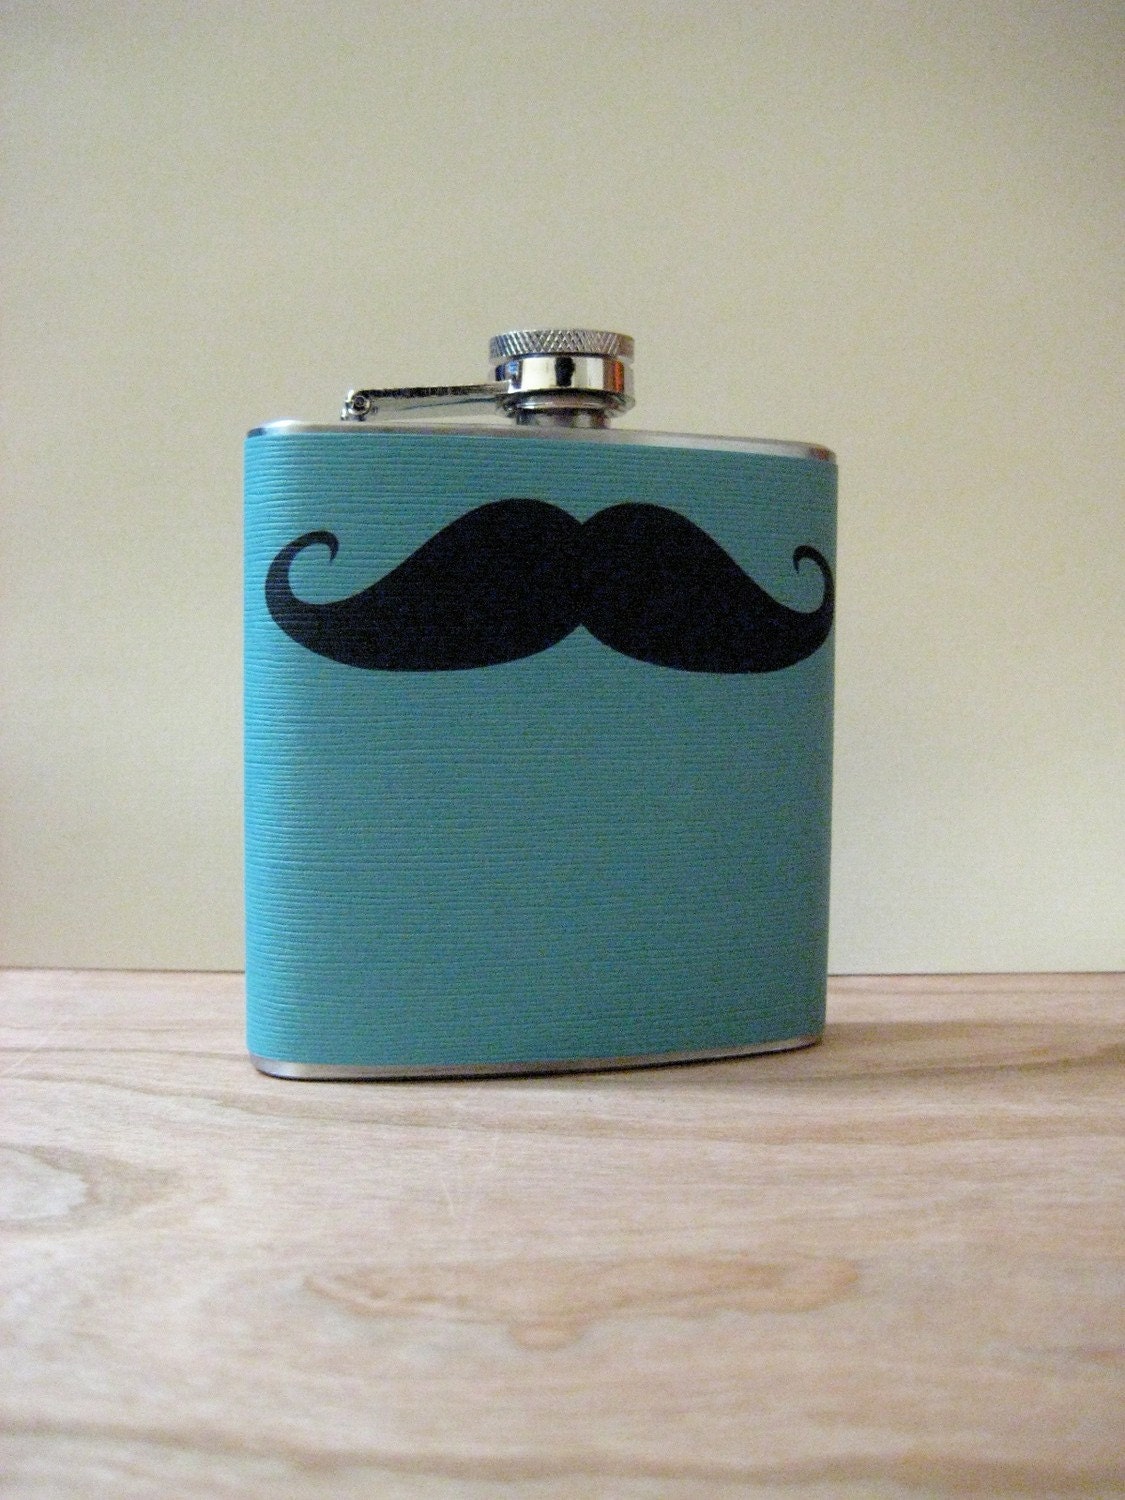 6 oz Stainless Steel Flask - The Original Mustache Love-on Light Cerulean- Perfect for your dad, brother, boyfriend, or husband